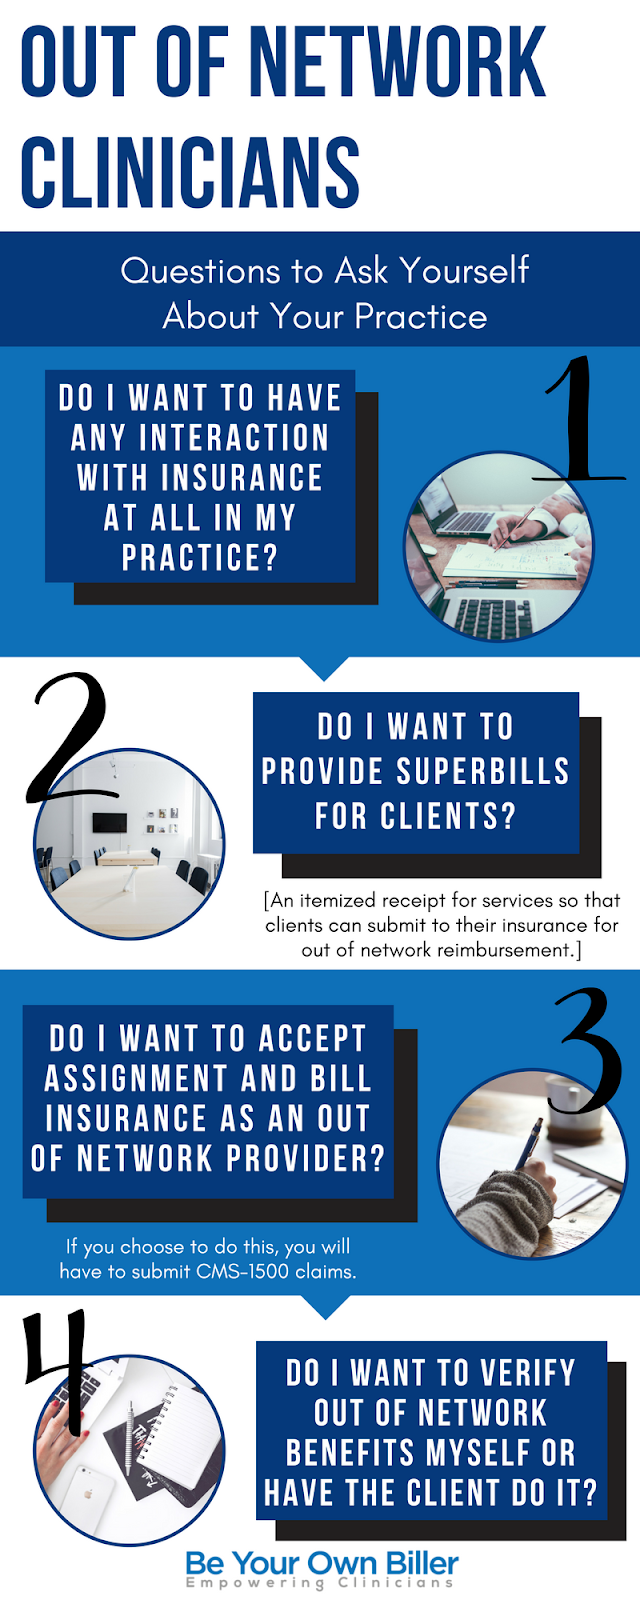 Guest post by Danielle Kepler of beyourownbiller.com I recommend every clinician in-network or out-of-network mention insurance on their website, even if you do not accept any insurance and want nothing to do with it. Let’s face it, you can’t avoid at least some interaction with it. 